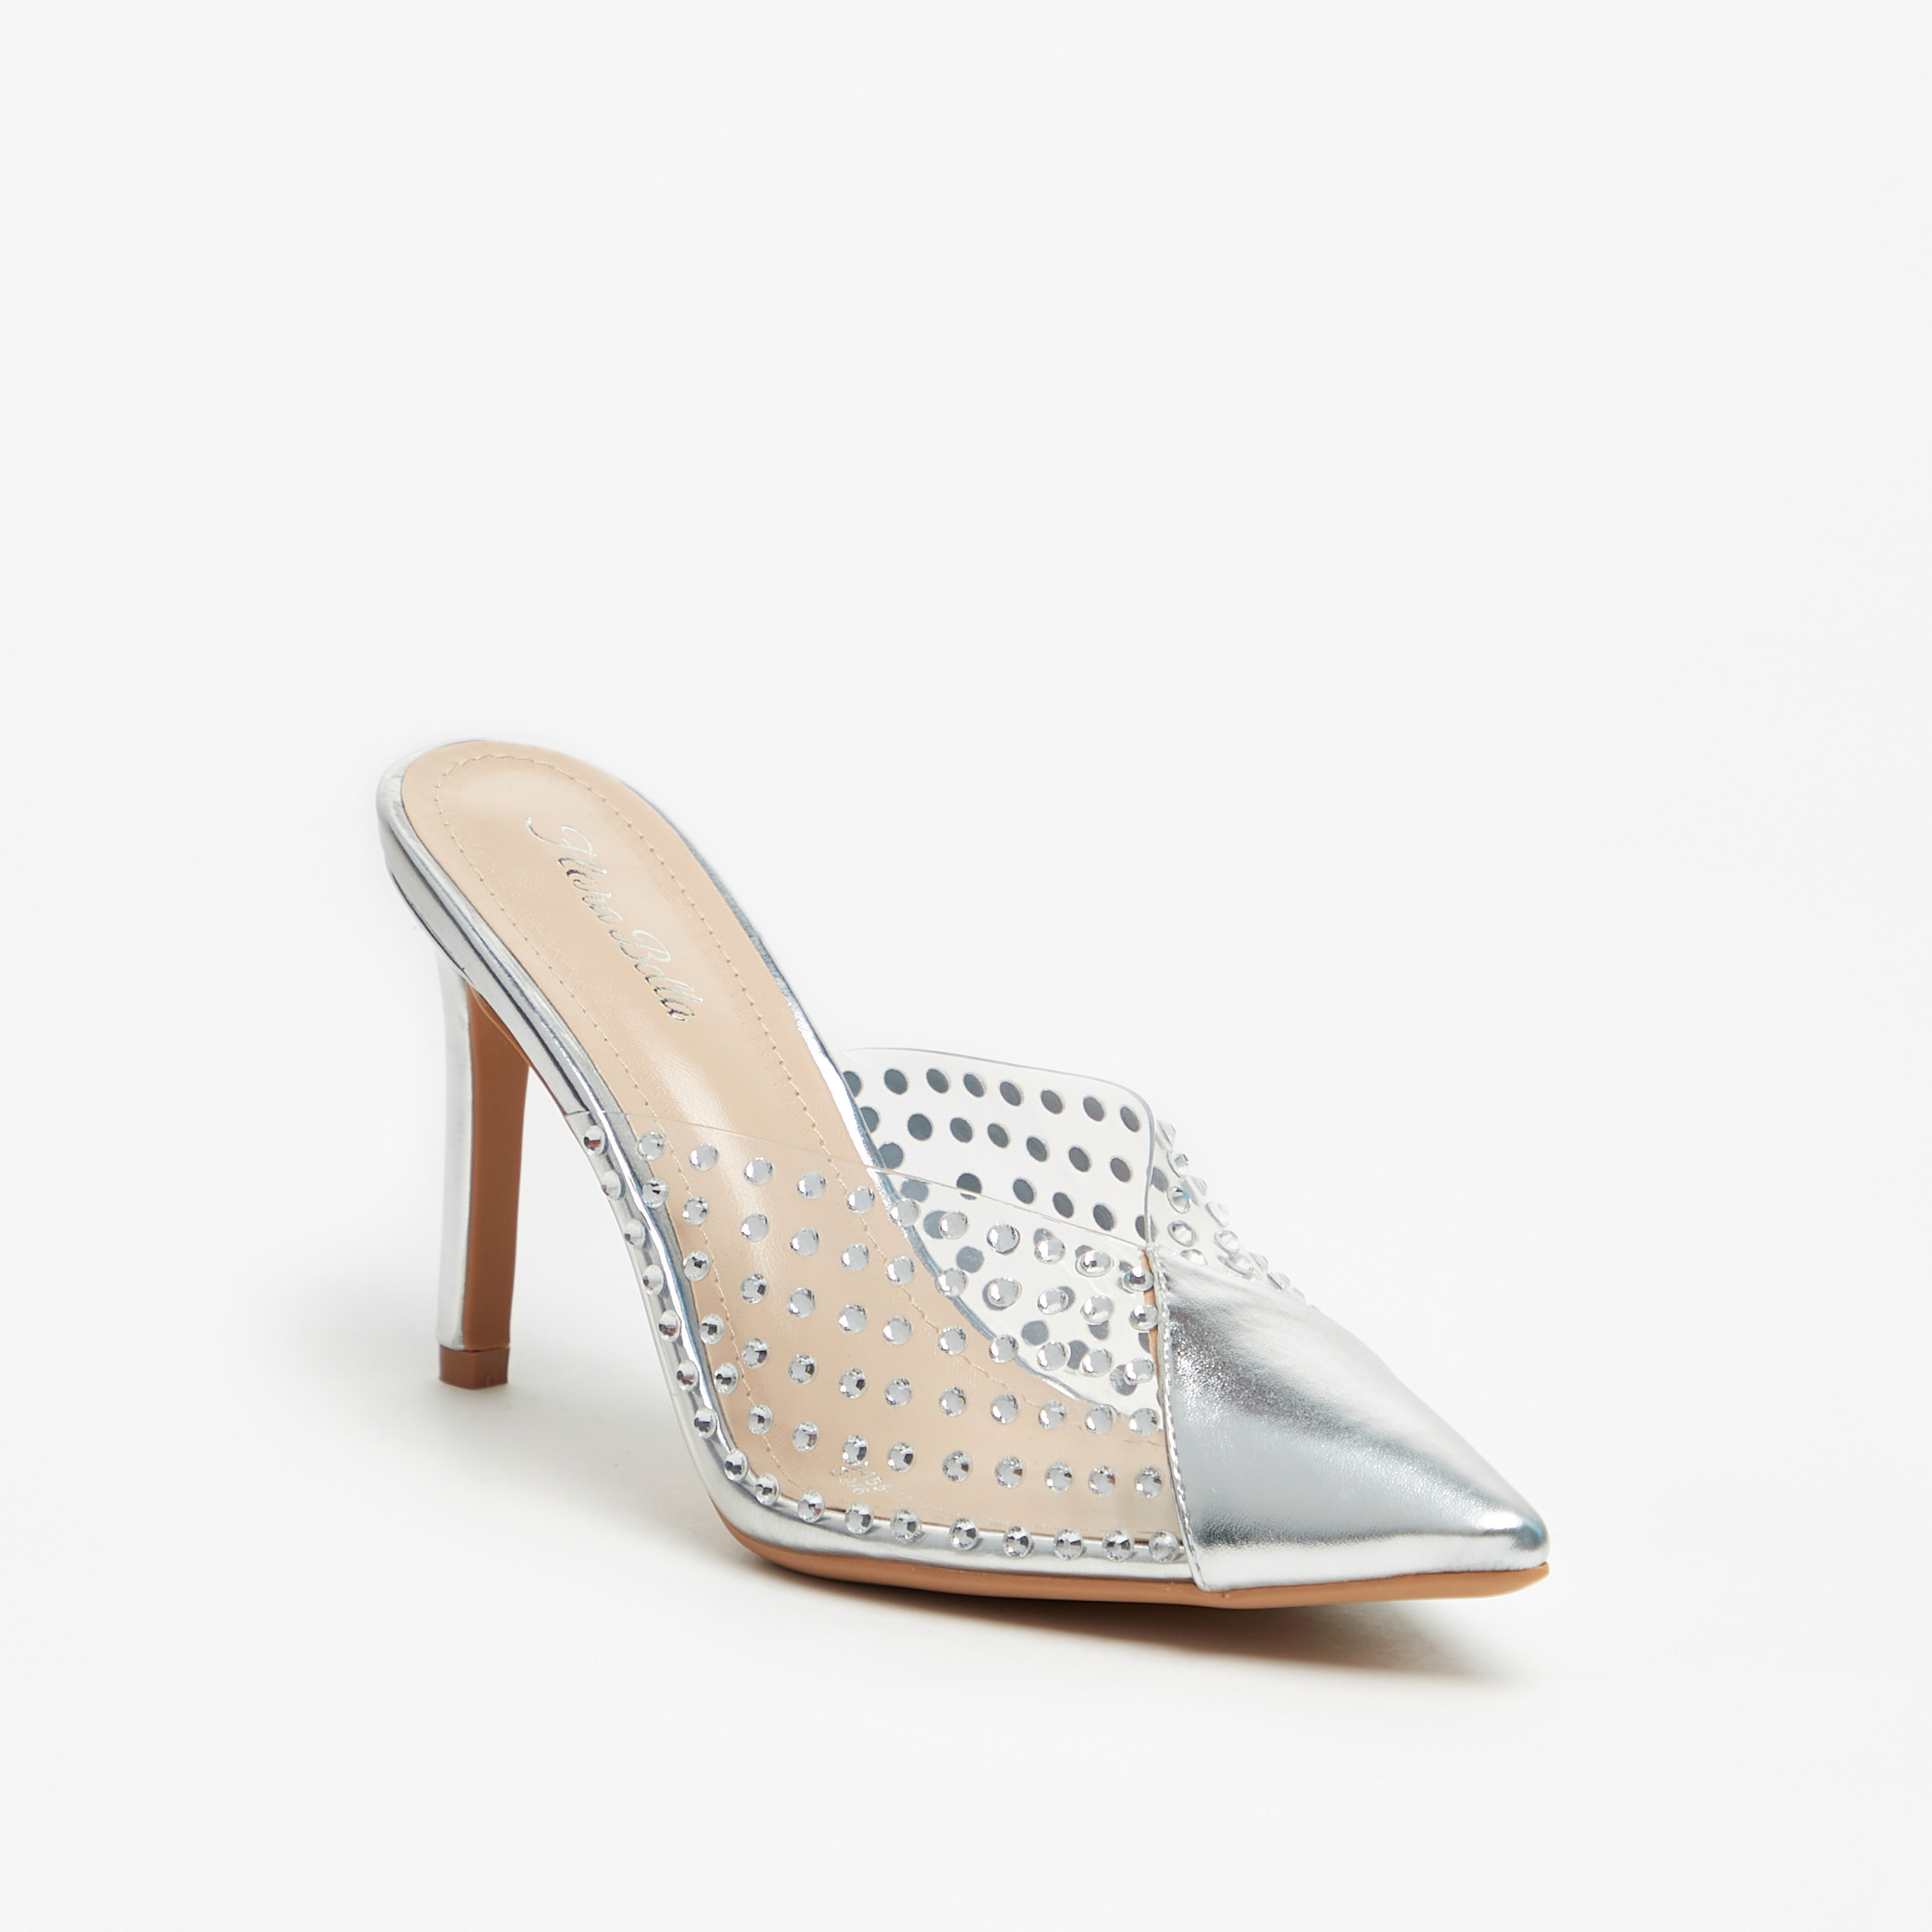 Chalk Studded Pointed-Toe Block Heel Mules - CHARLES & KEITH LT